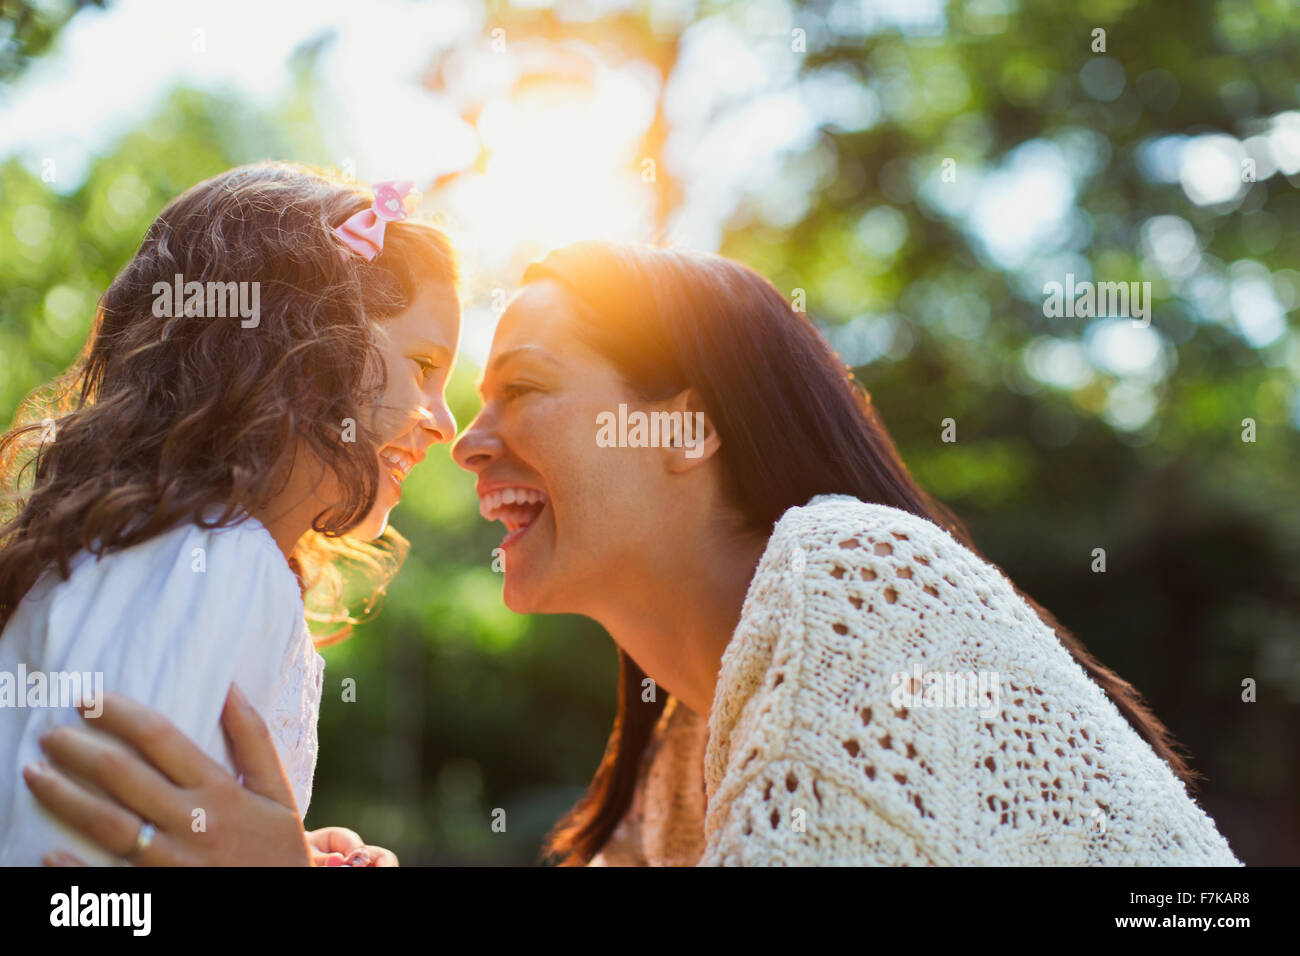 Enthusiastic mother and daughter smiling face to face Stock Photo